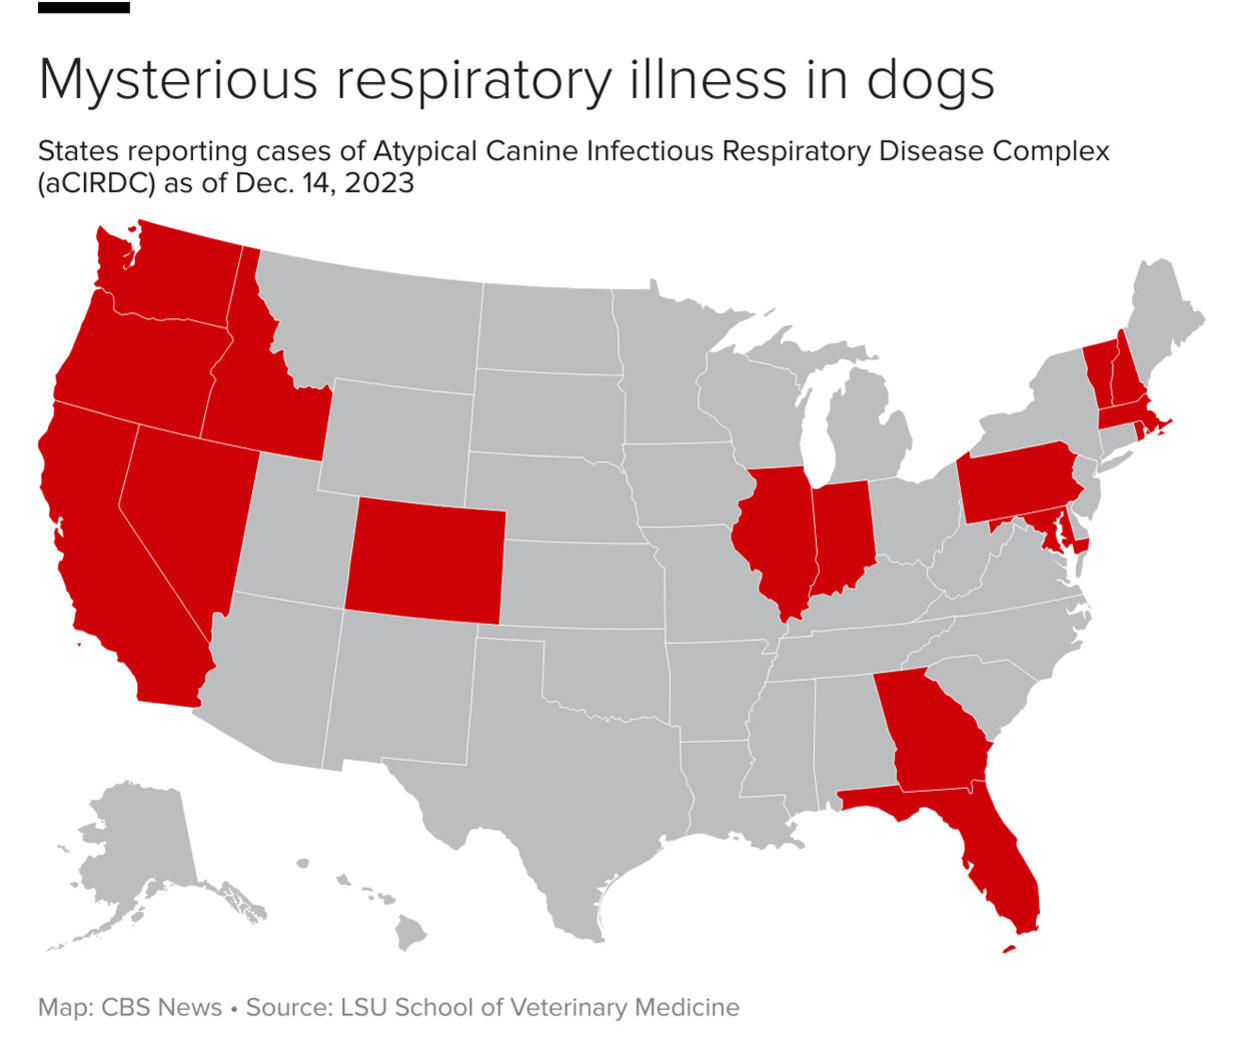 The mysterious respiratory illness in canines spreads nationwide from coast to coast.